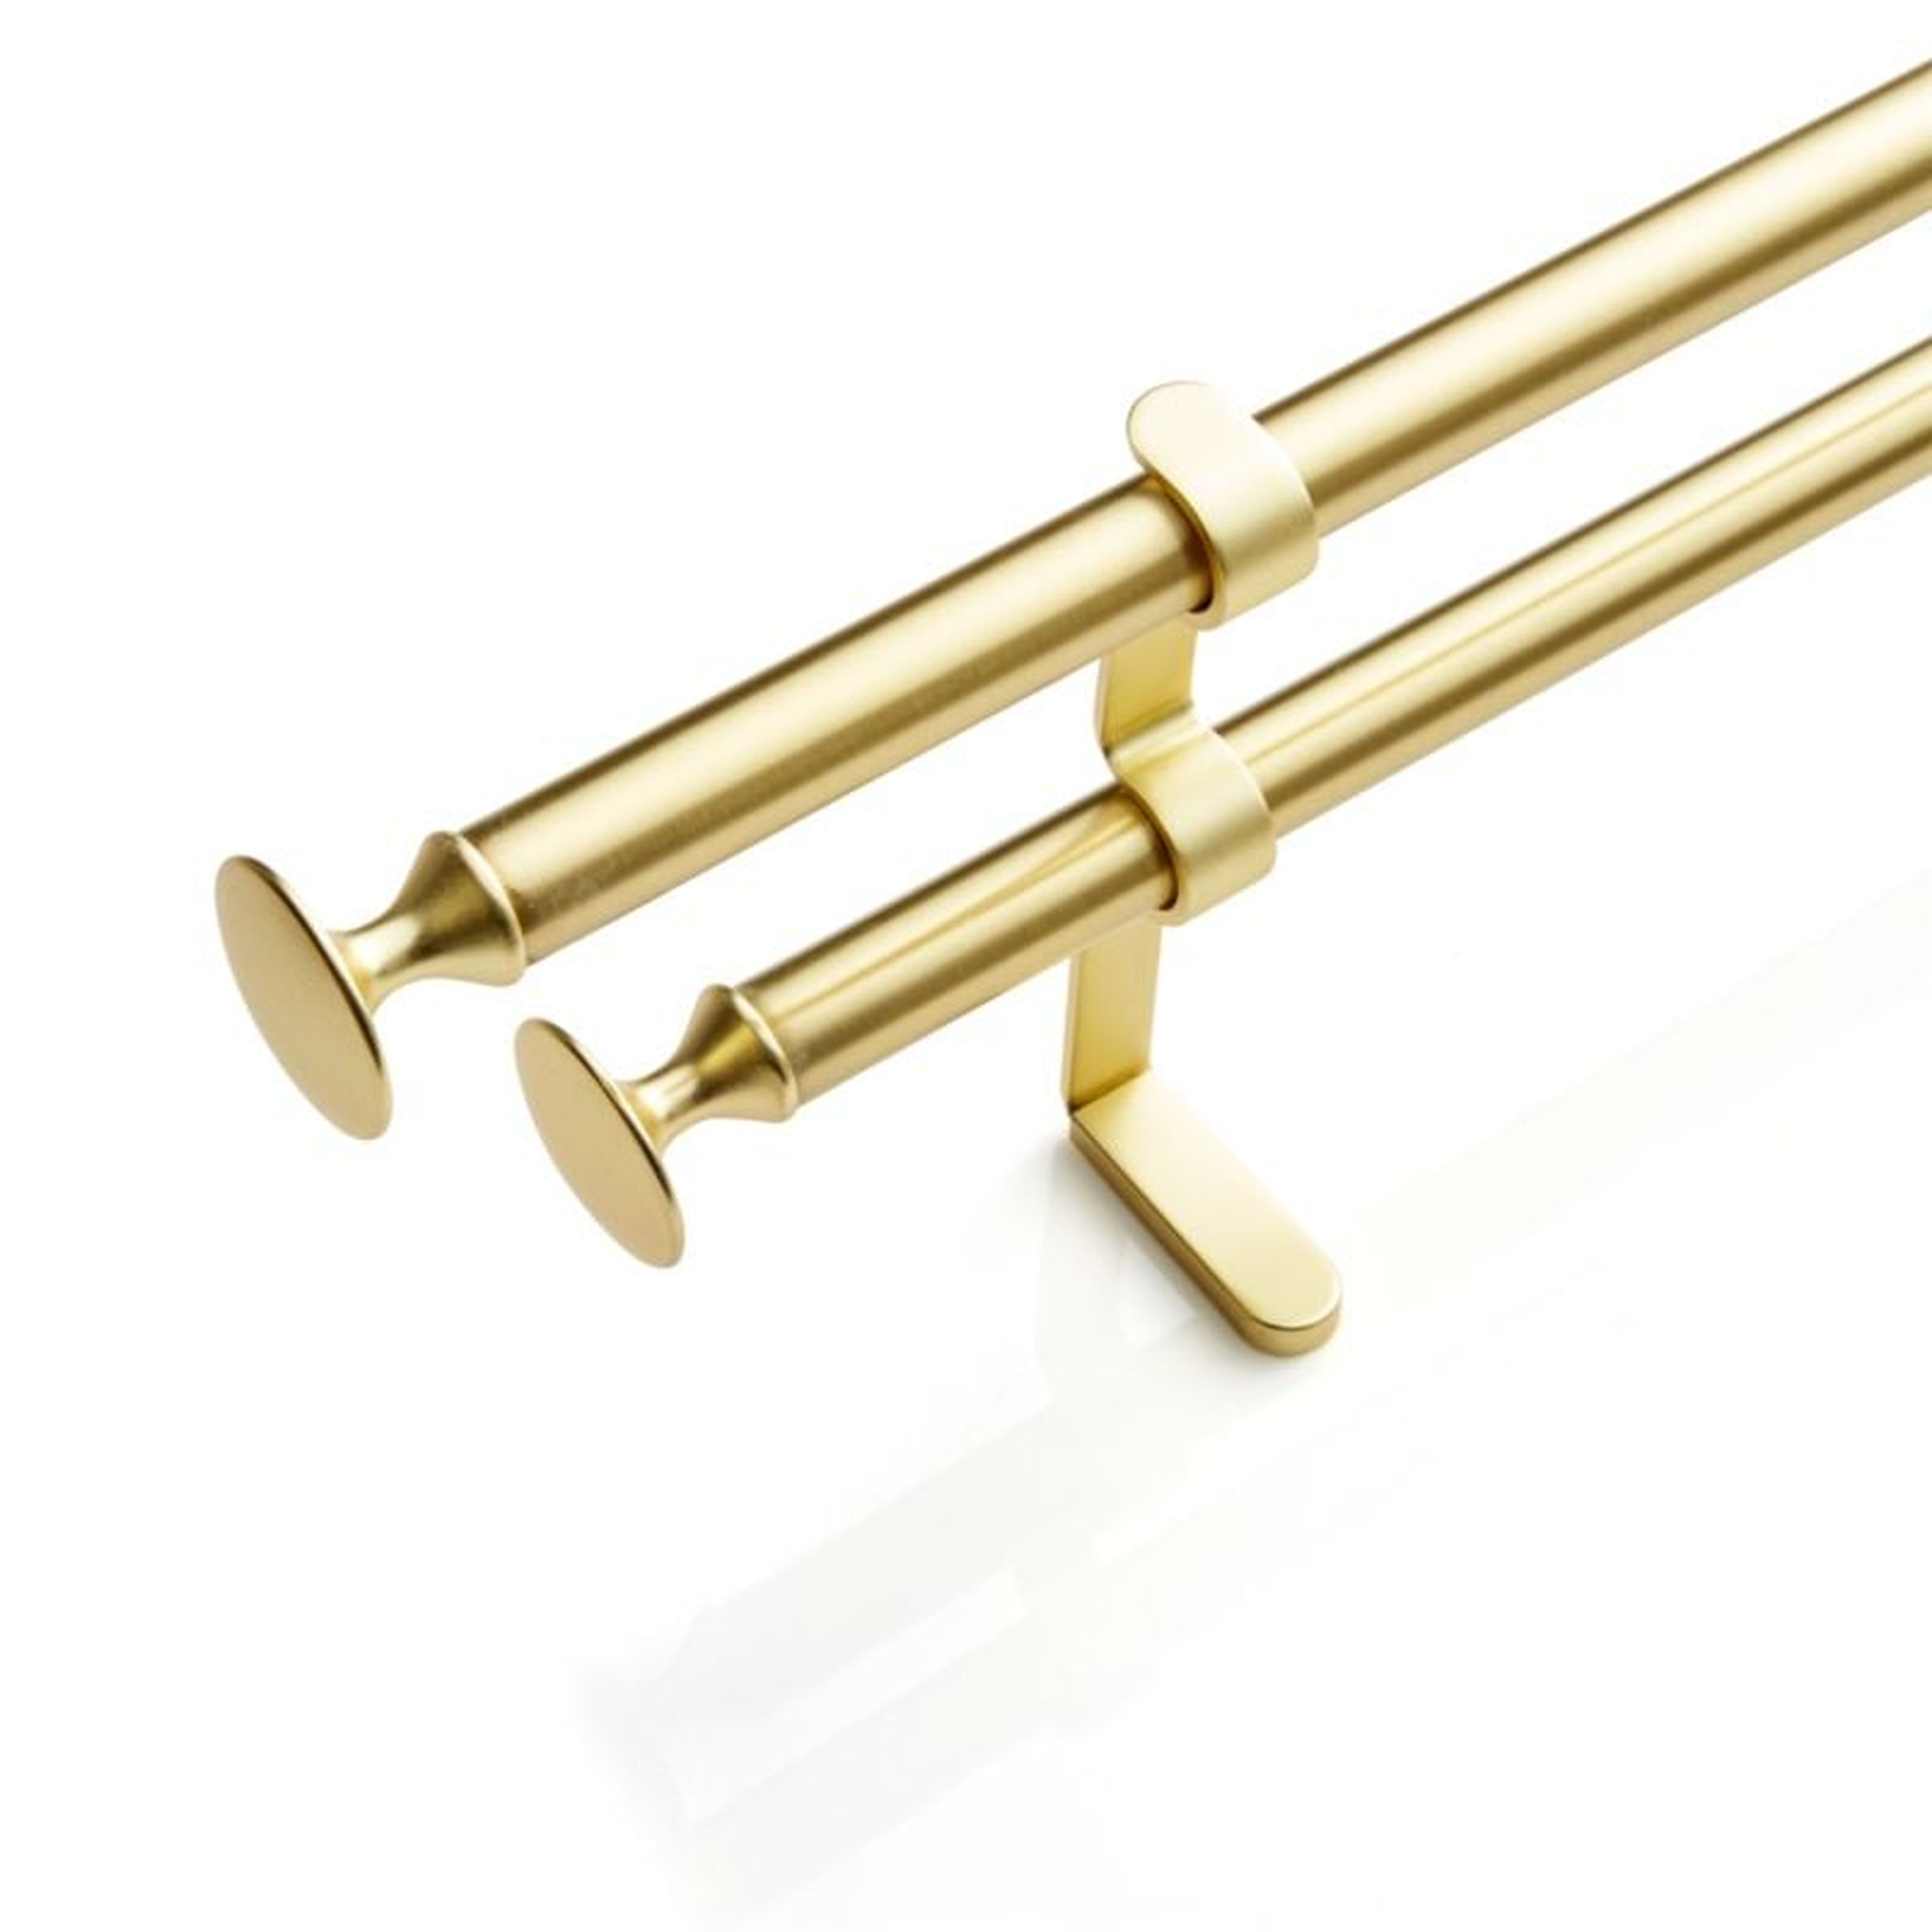 Double 48-88" Gold Curtain Rod - Crate and Barrel